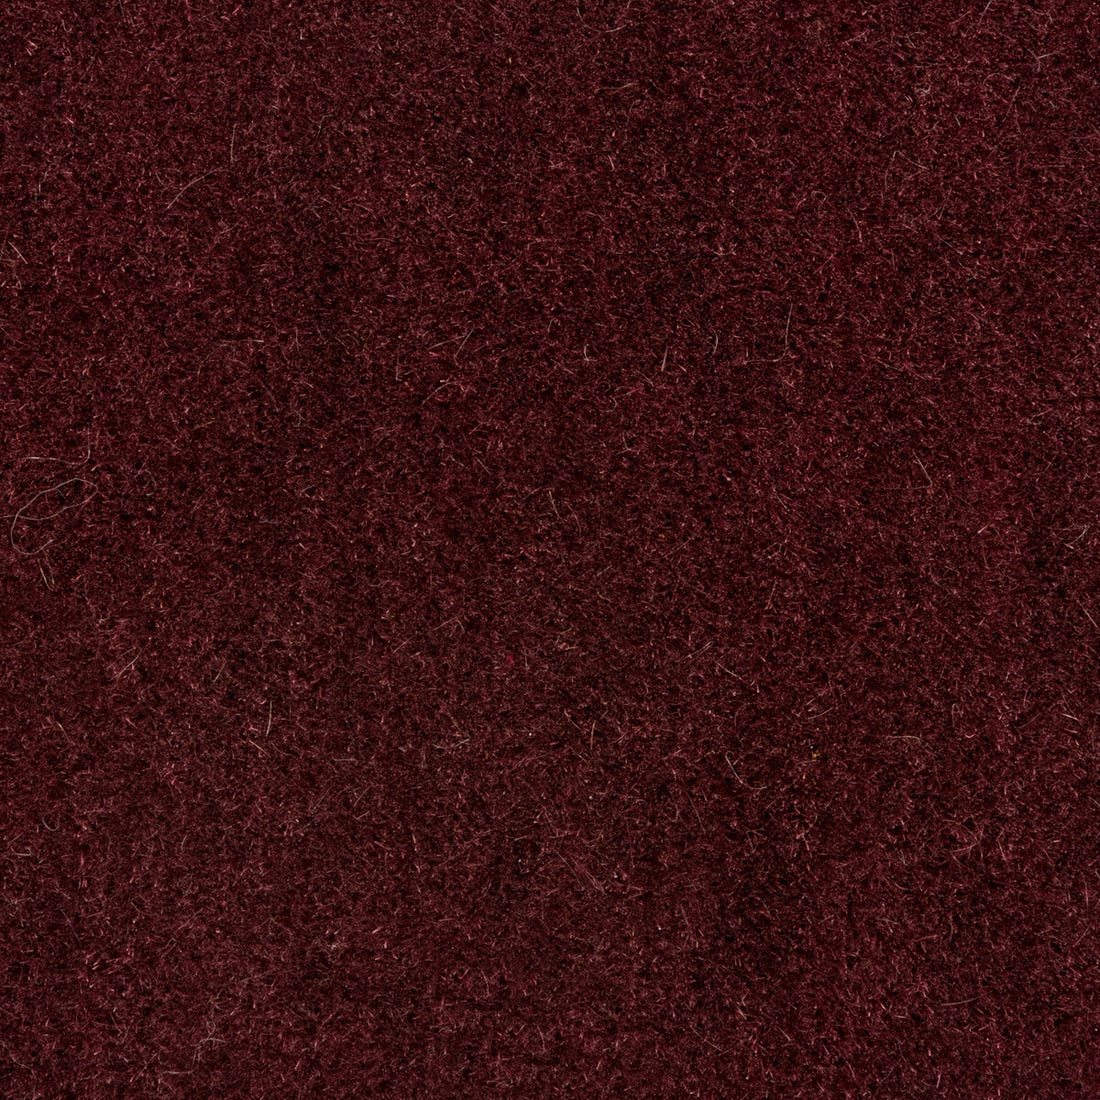 Bachelor Mohair fabric in cola color - pattern 8014101.610.0 - by Brunschwig &amp; Fils